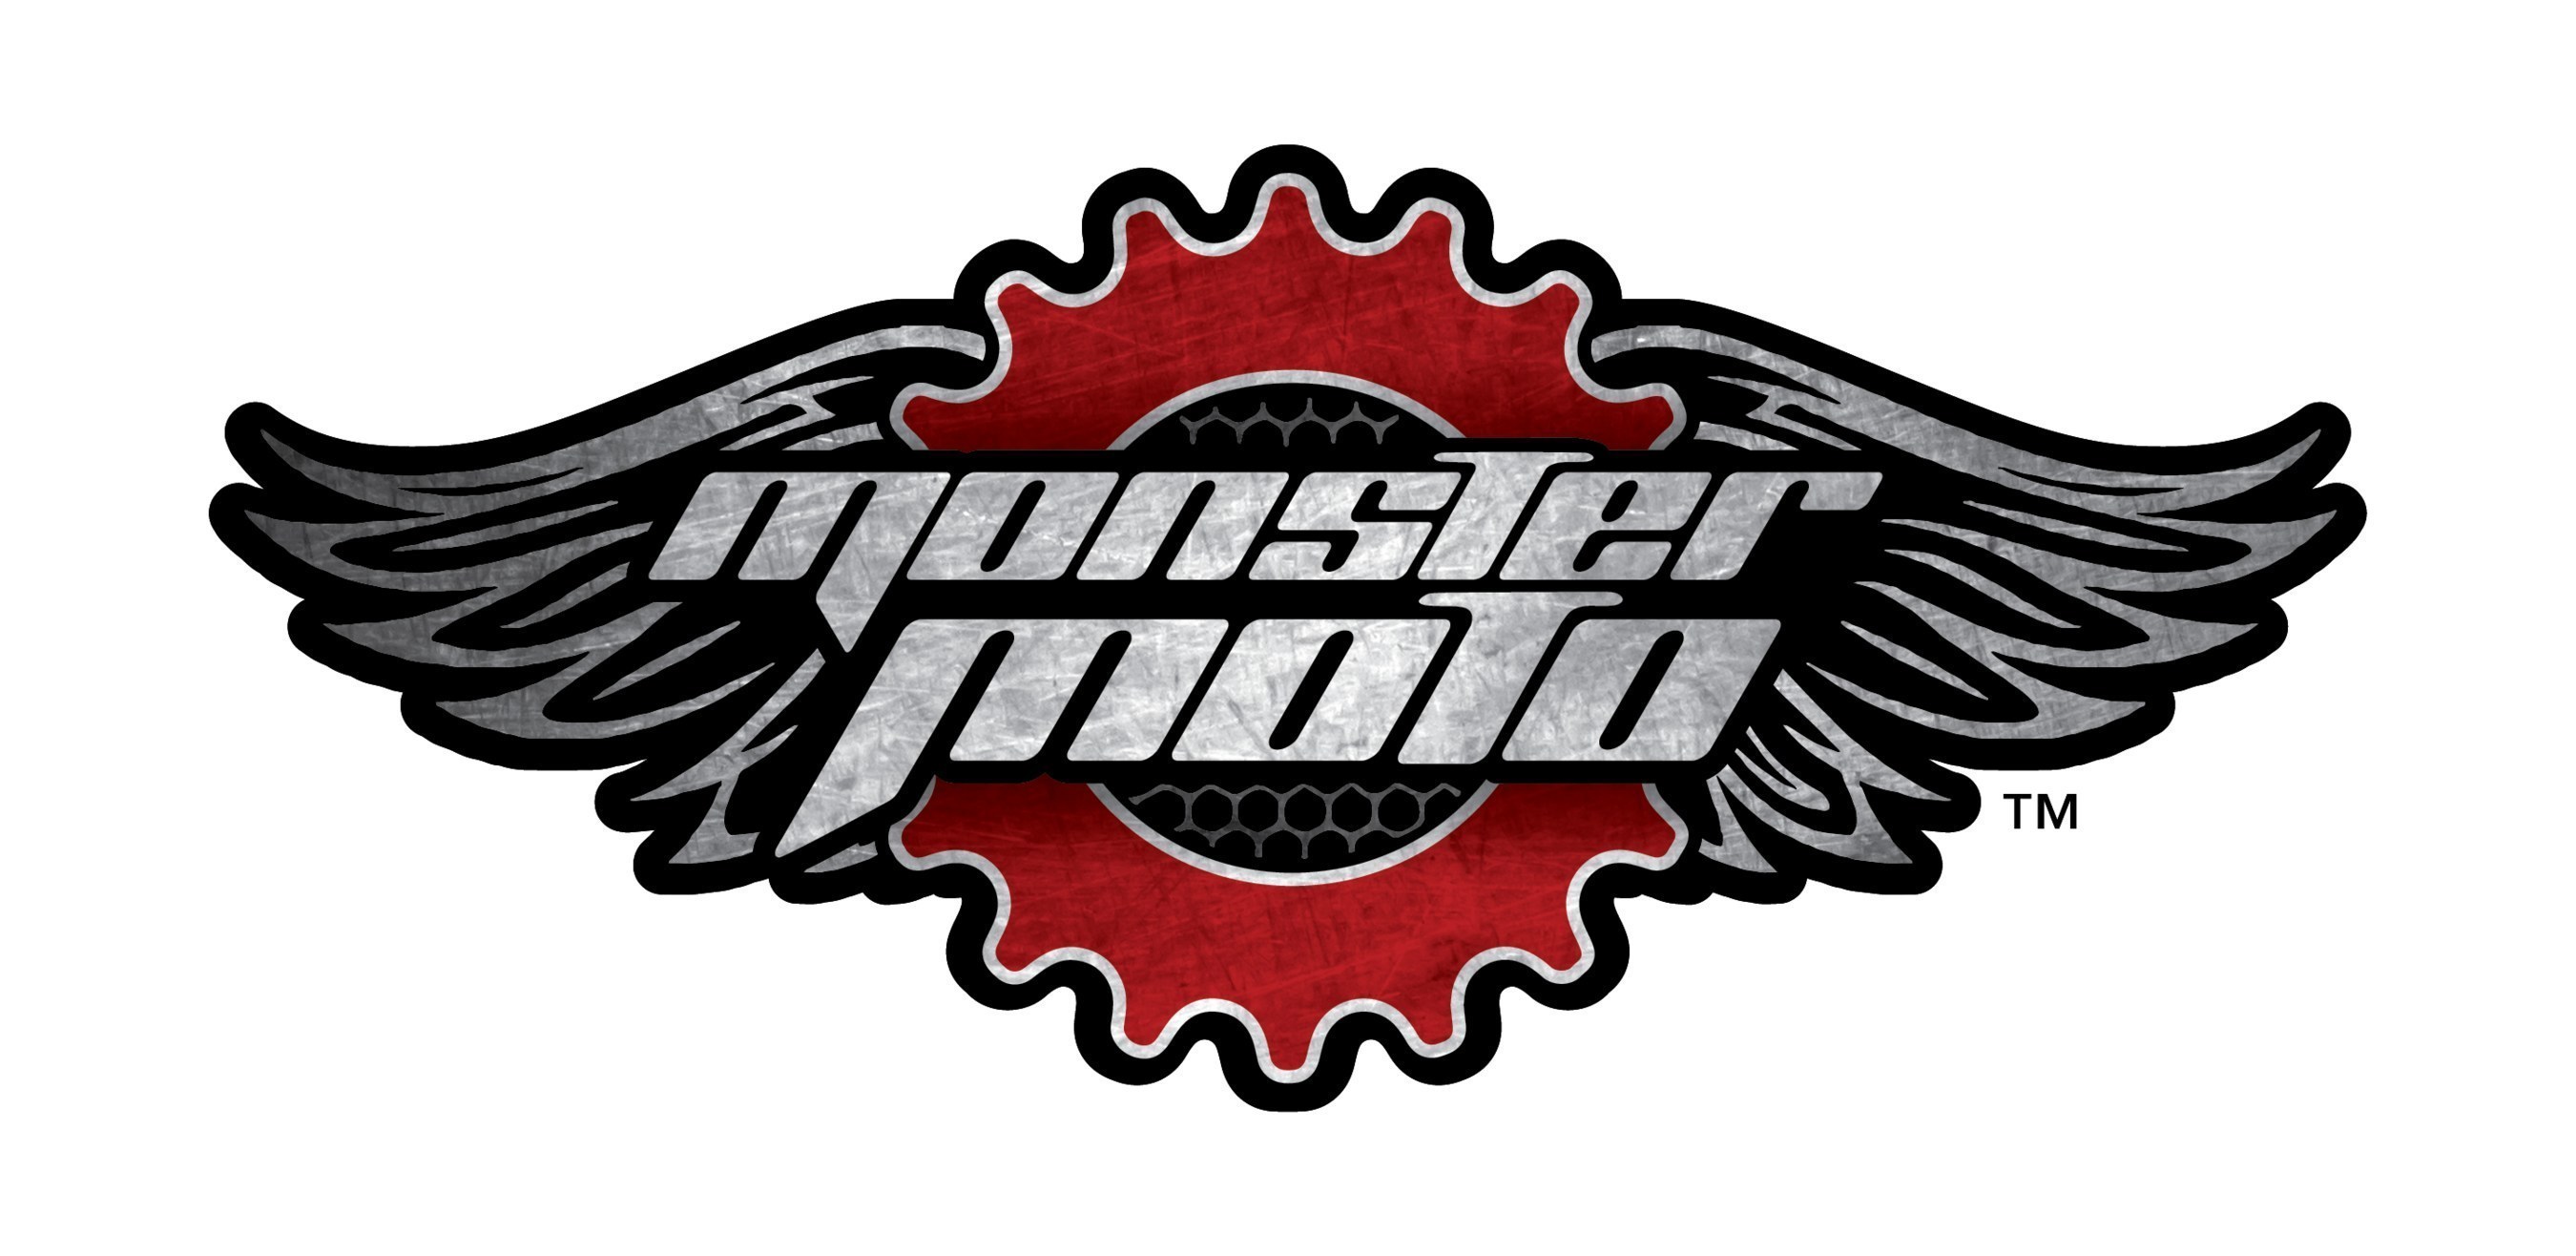 About Monster Moto - Monster Moto is a maker of high quality, affordable mini bikes and go-karts. By 2017, all of Monster Moto's products will be completely assembled in the United States at the company's 100,000 square foot production facility in Ruston, La. Founded in 2013, Monster Moto focuses on ensuring all of its mini bikes and go-karts are made with high quality parts and detailed attention to construction to help get kids outside to focus on the important things: enjoying the outdoors, exploring...